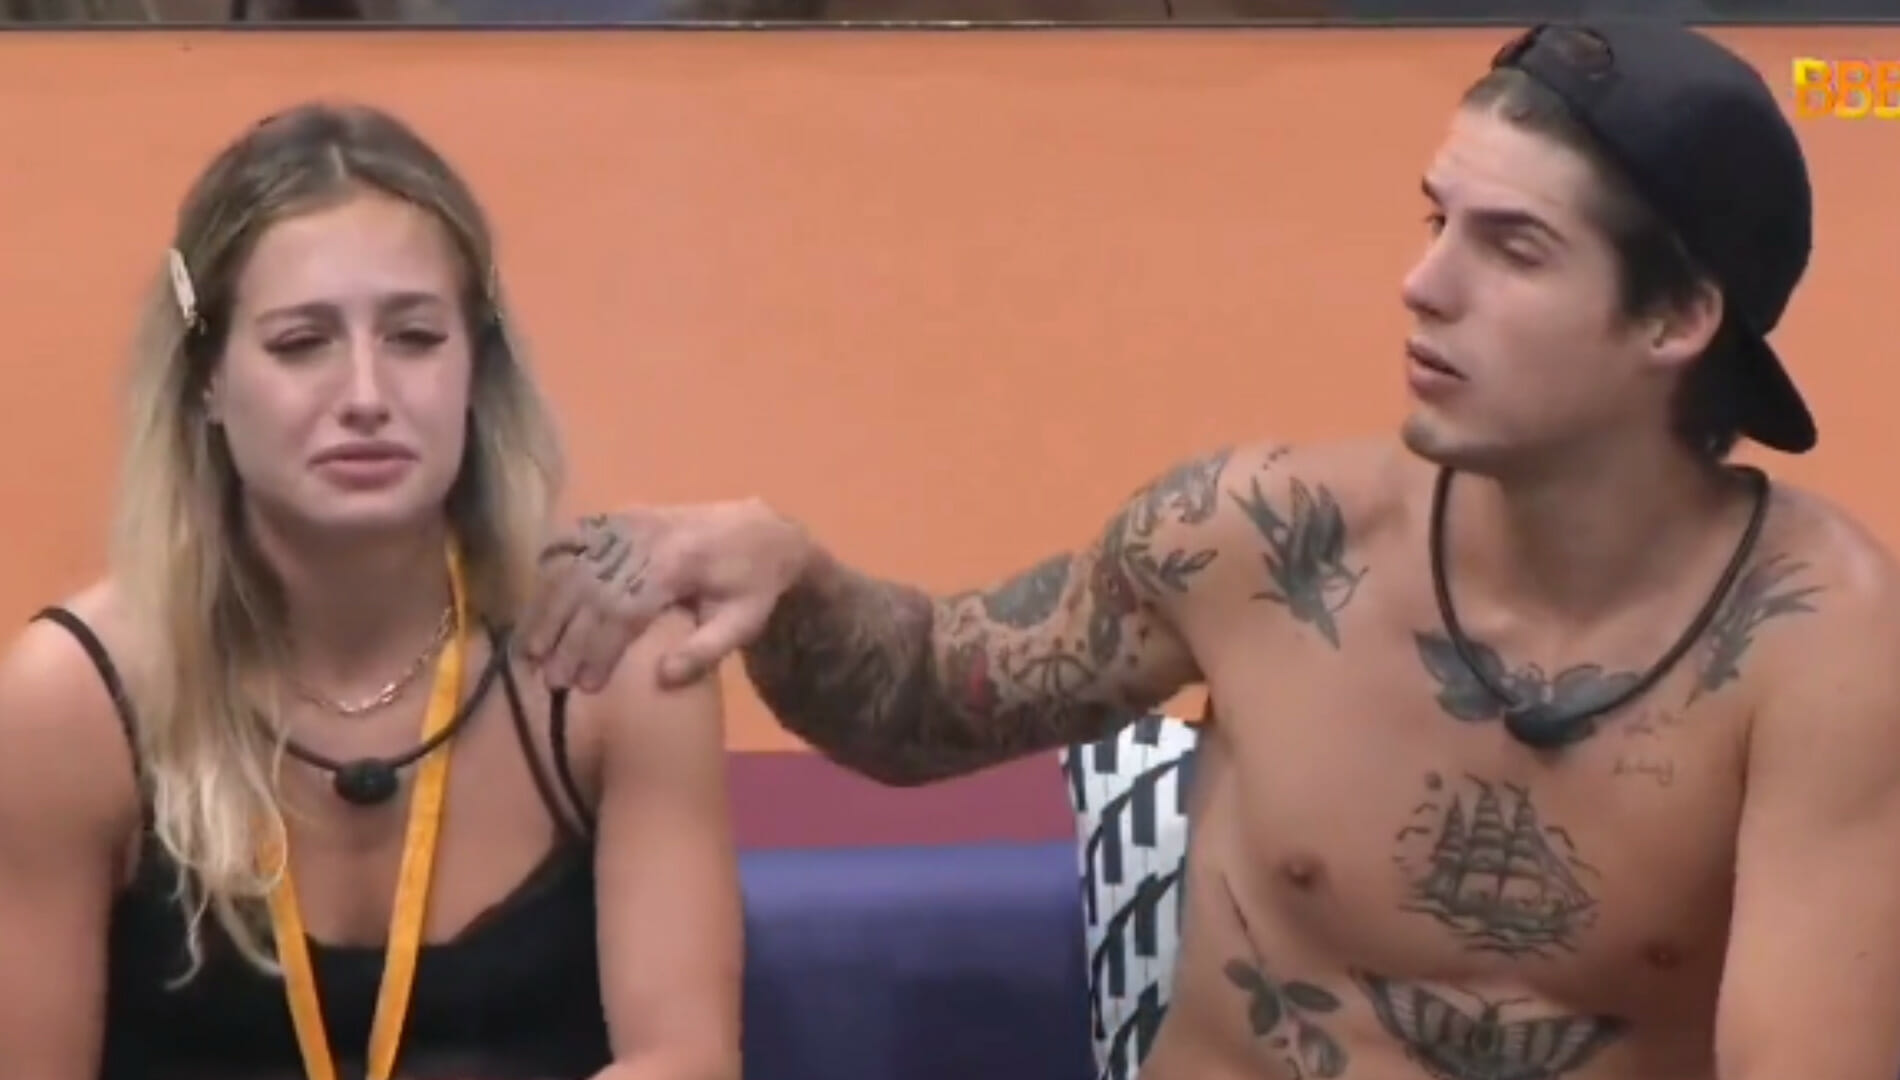 At BBB 23 Gabriel attacks Bruna Griphao and threatens Hes